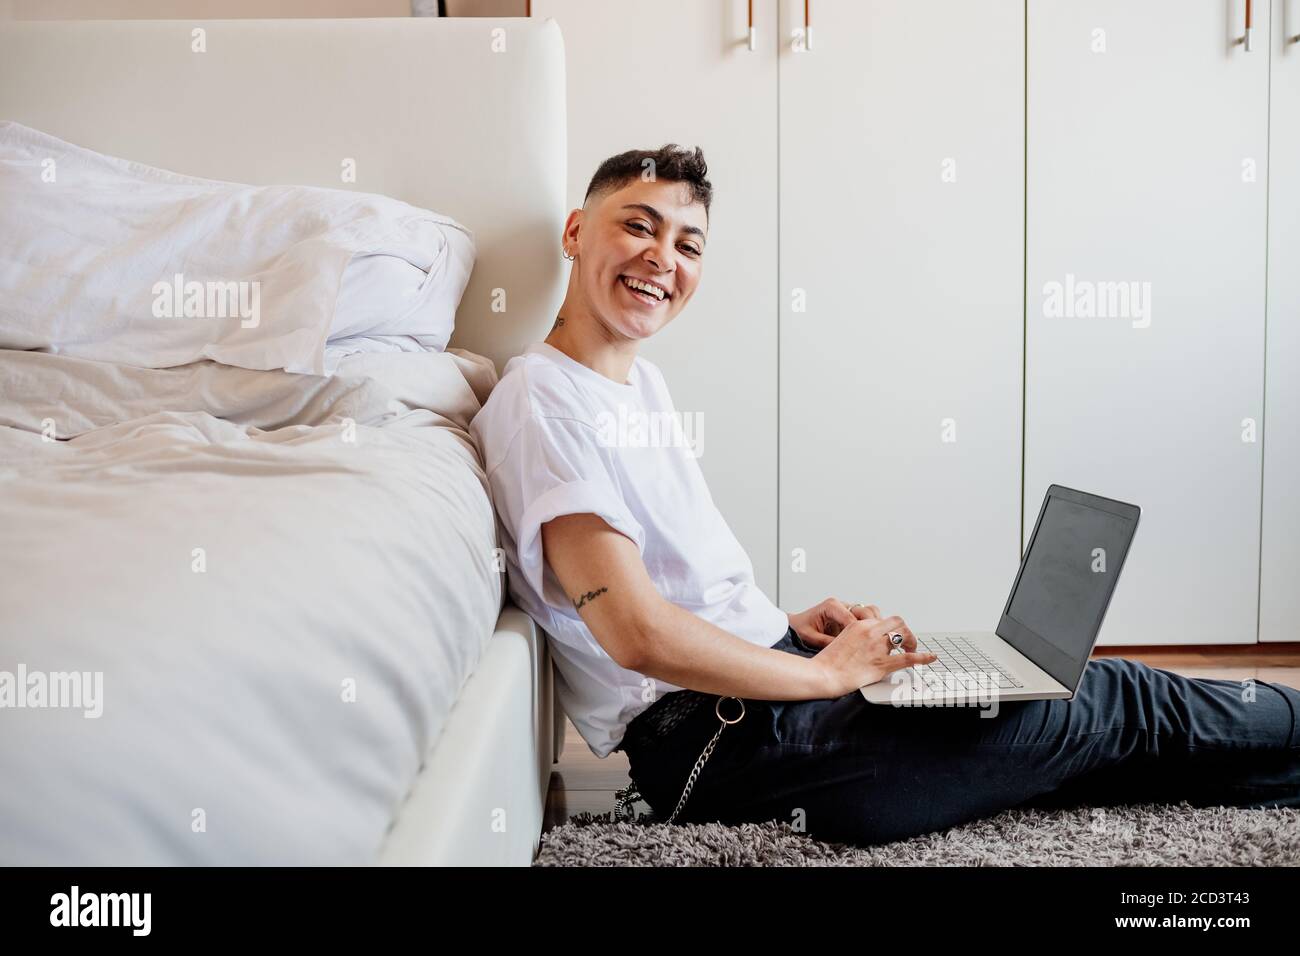 Young woman with shaved head sitting in bedroom, using laptop, smiling at camera. Stock Photo